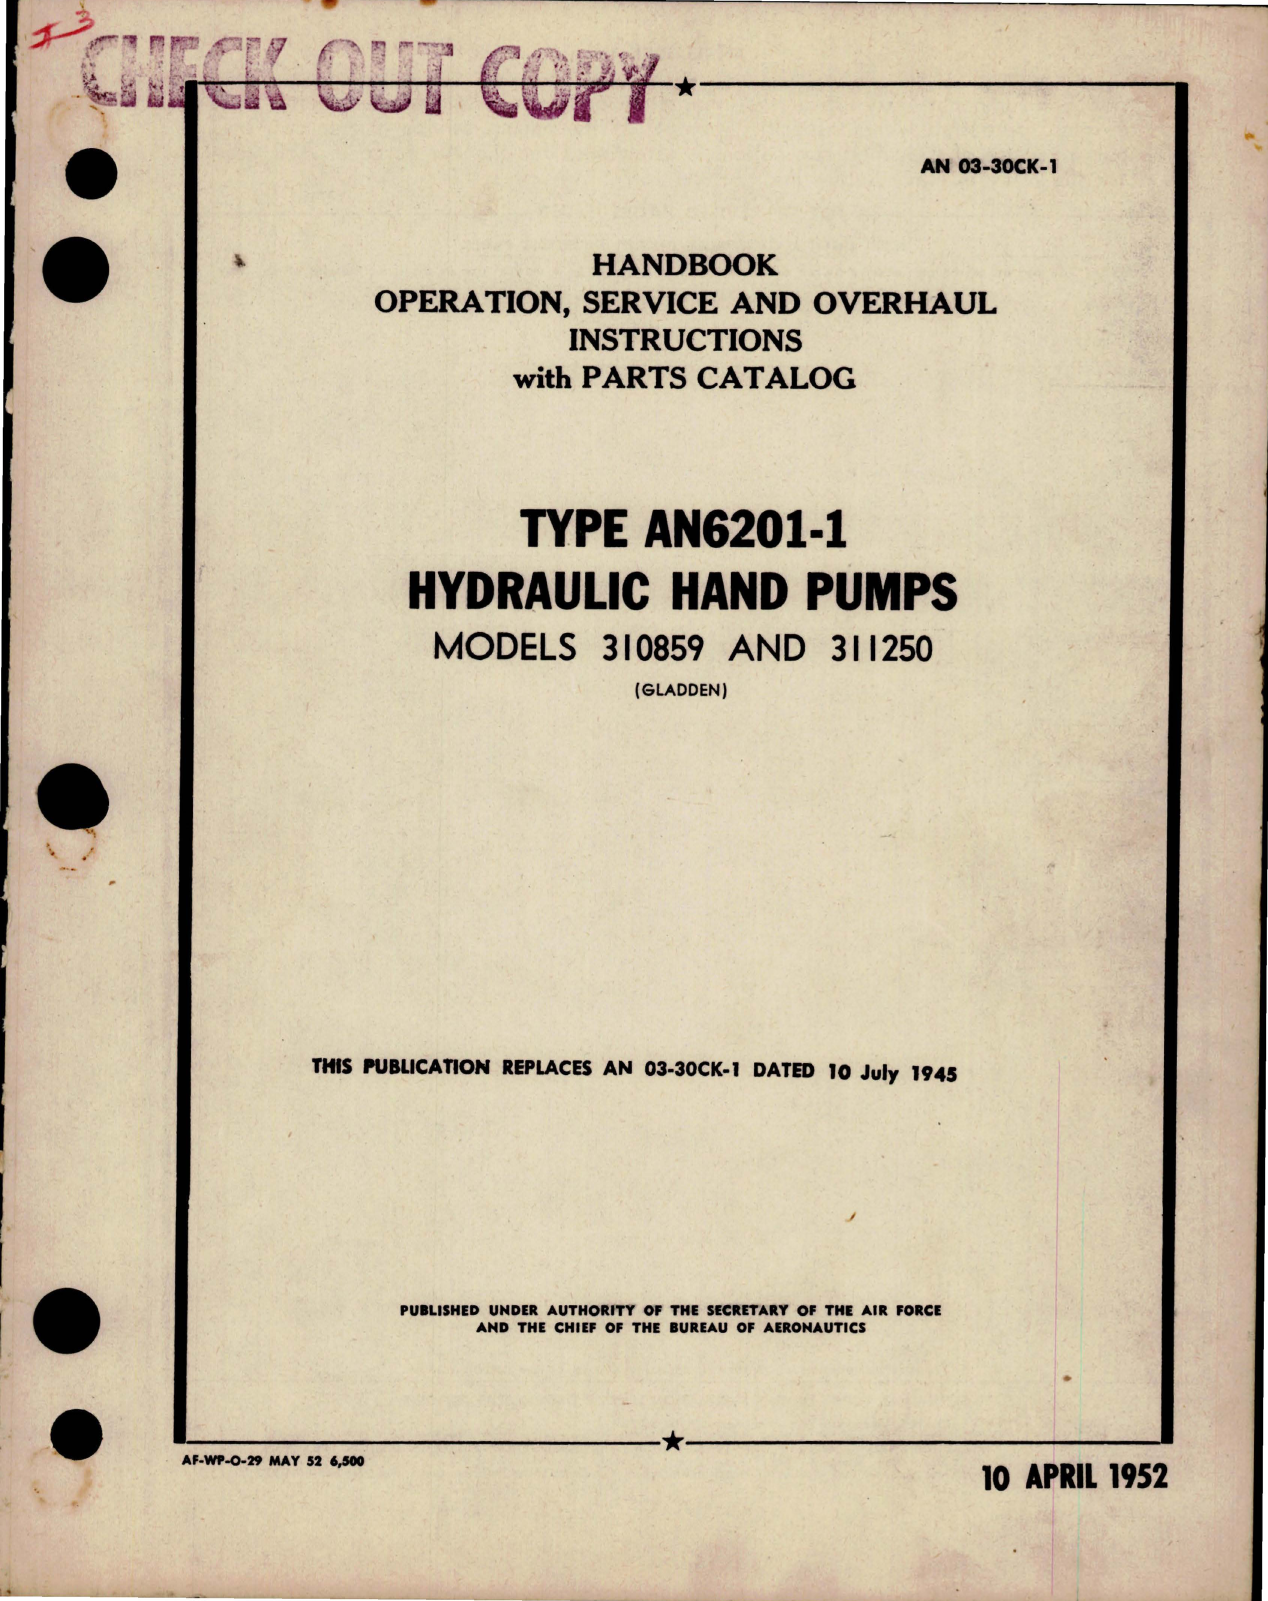 Sample page 1 from AirCorps Library document: Operation, Service and Overhaul Instructions with Parts Catalog for Hydraulic Hand Pumps - Type AN6201-1 - Models 310859, 311250 